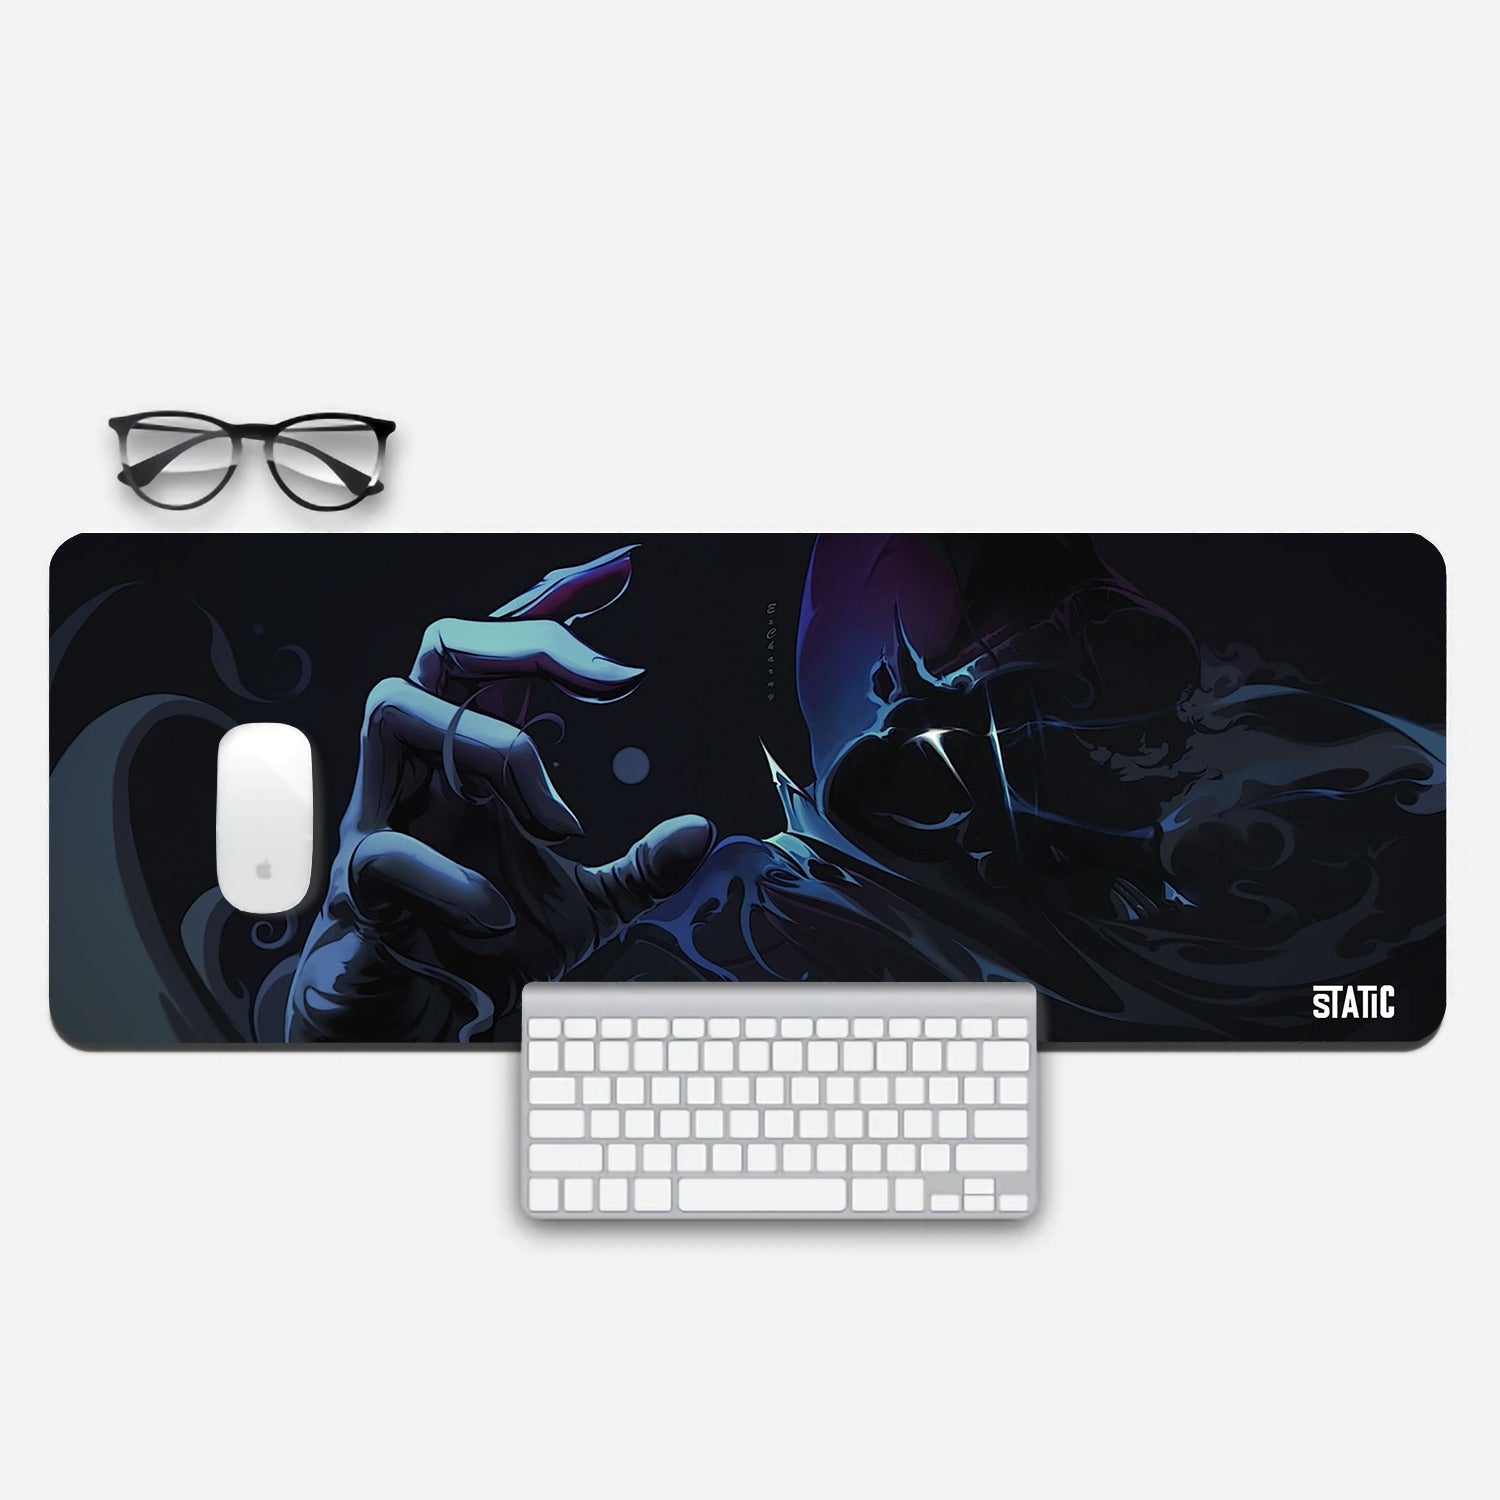 Unleash the enigmatic aura of Omen from Valorant with our Extended Gaming Mouse Pad. This 800x300mm pad features Omen amidst a shroud of ominous grey clouds, setting the tone for tactical dominance. Dive into the realm of shadows and precision gaming, all while enjoying superior control and comfort. Elevate your gaming setup with this unique accessory and immerse yourself in Valorant's mysterious world. Don't let victory slip through your fingers - equip yourself with the power of Omen today!